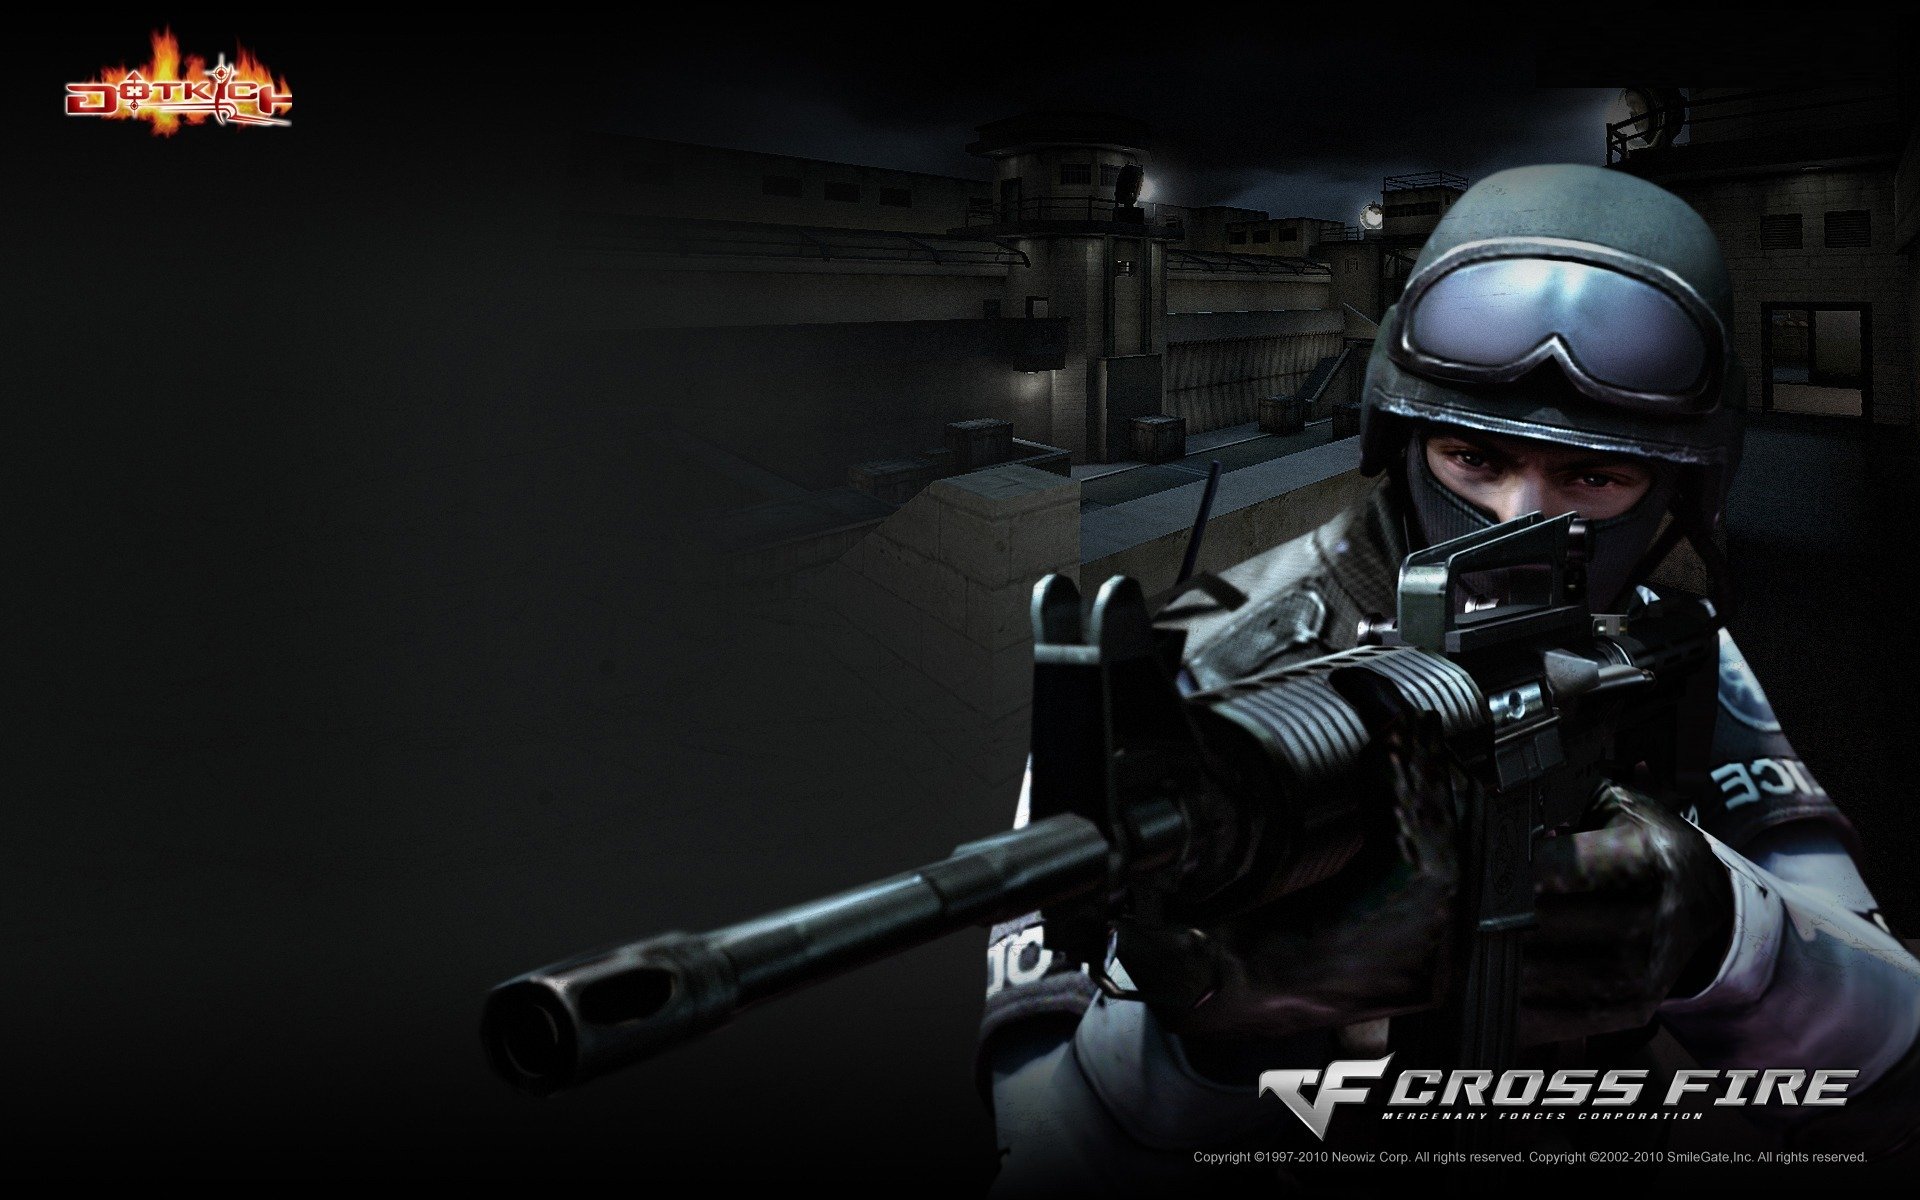 crossfire, Online, Fps, Shooter, Fighting, Action, Military, Tactical, Soldier, 1cfire, Stealth, Weapon, Gun Wallpaper